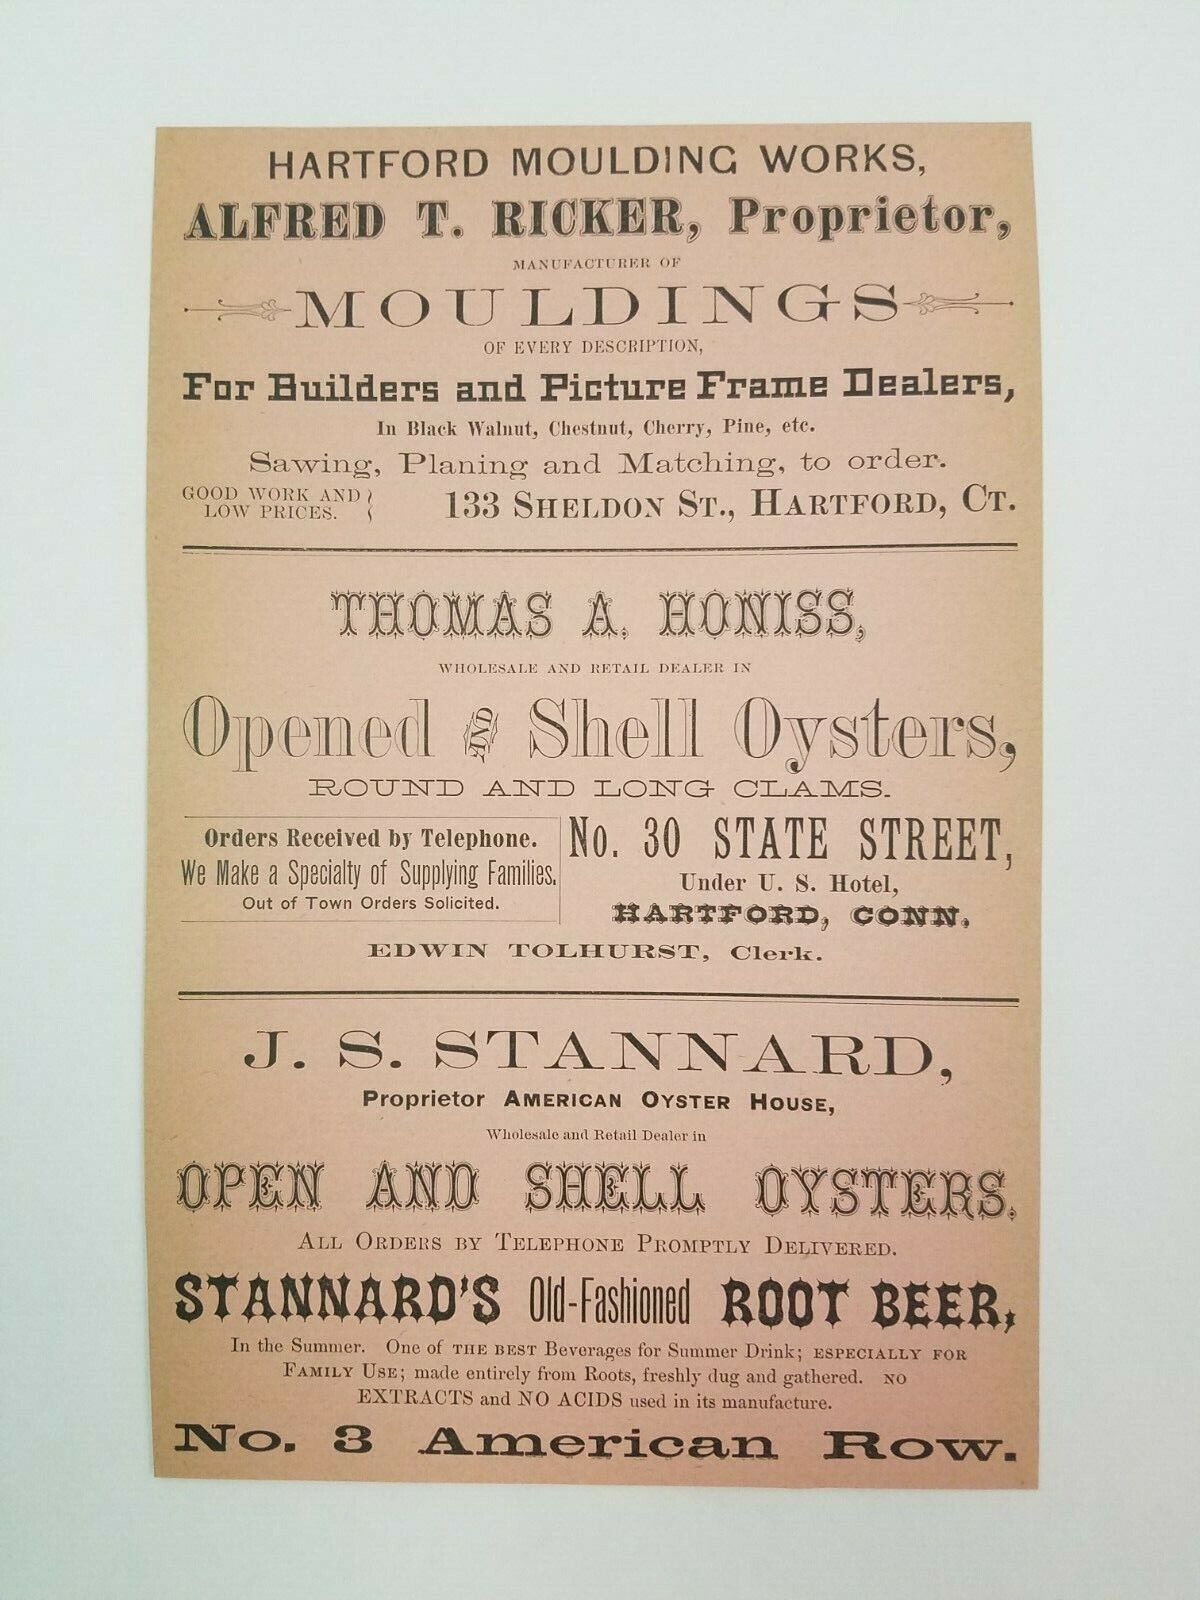 1886 Hartford Connecticut Advertisement Honiss Stannard Oysters Root Beer  